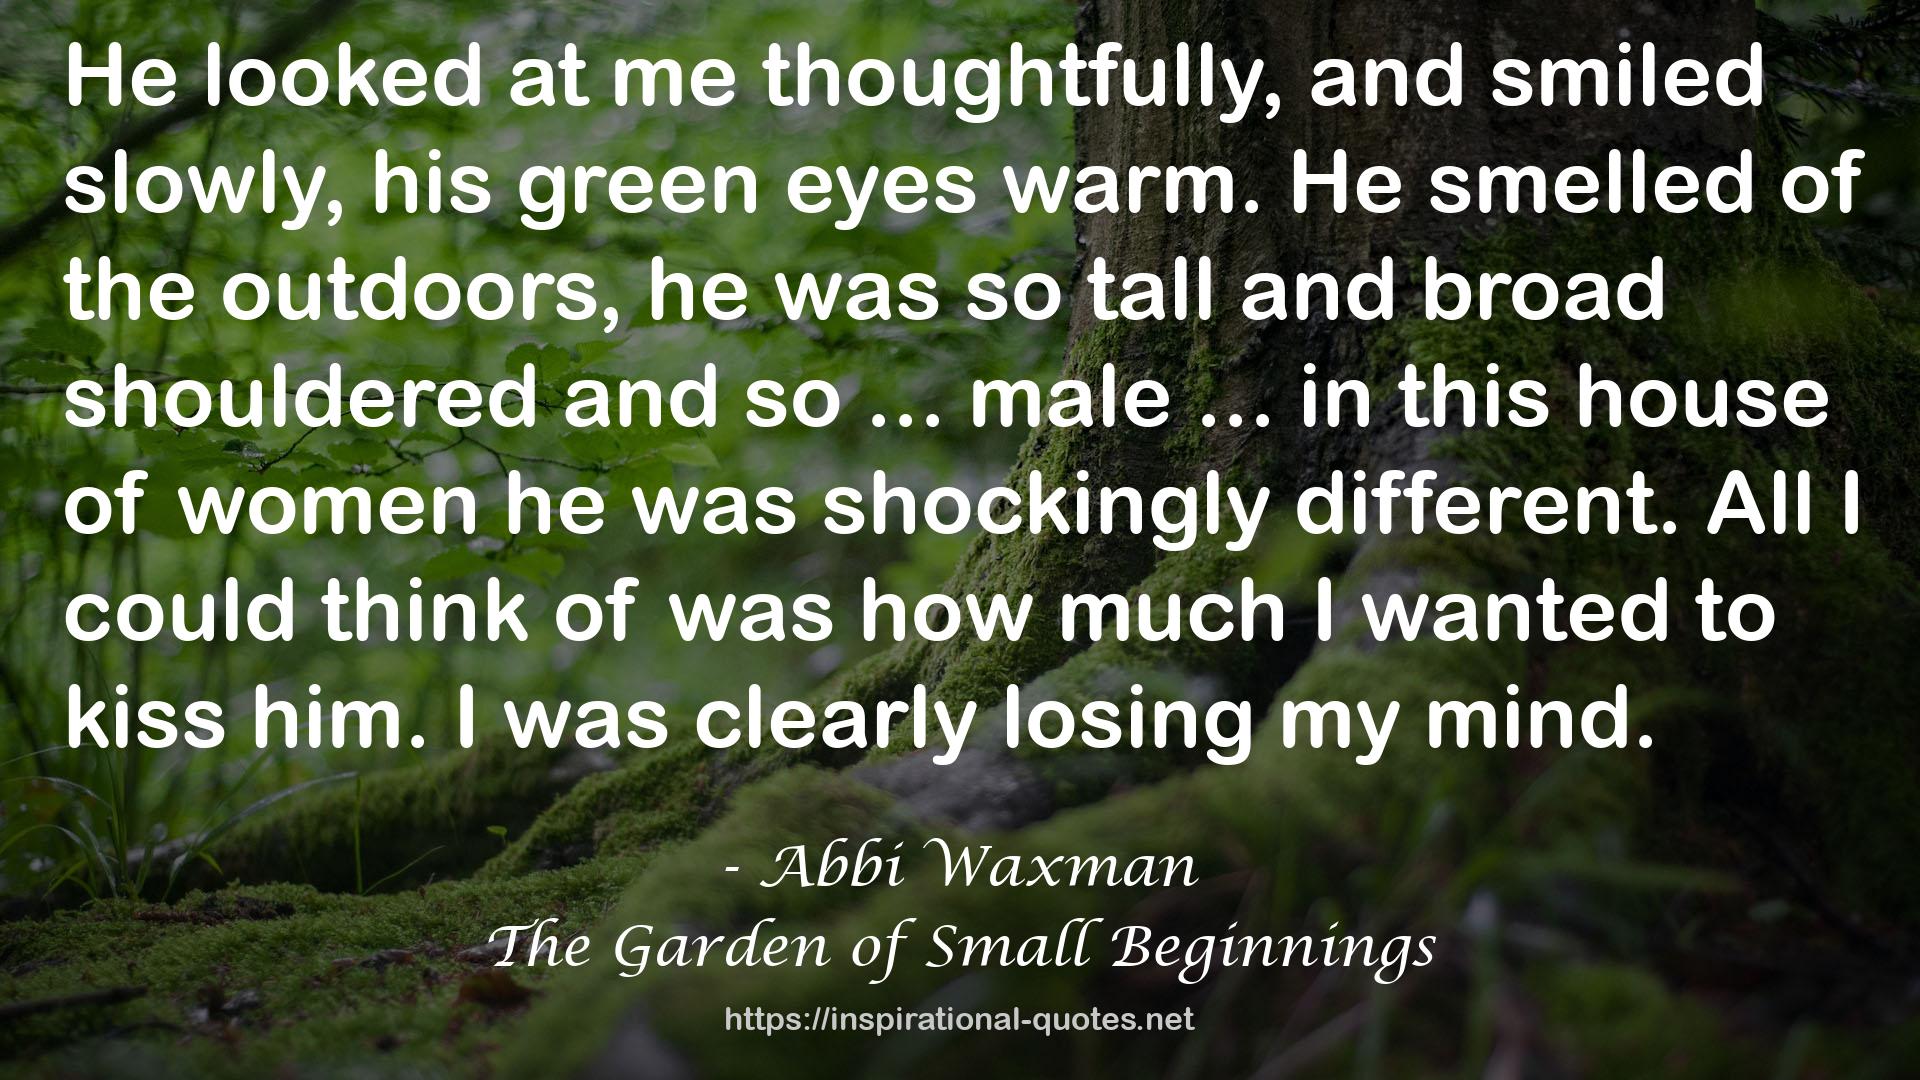 The Garden of Small Beginnings QUOTES